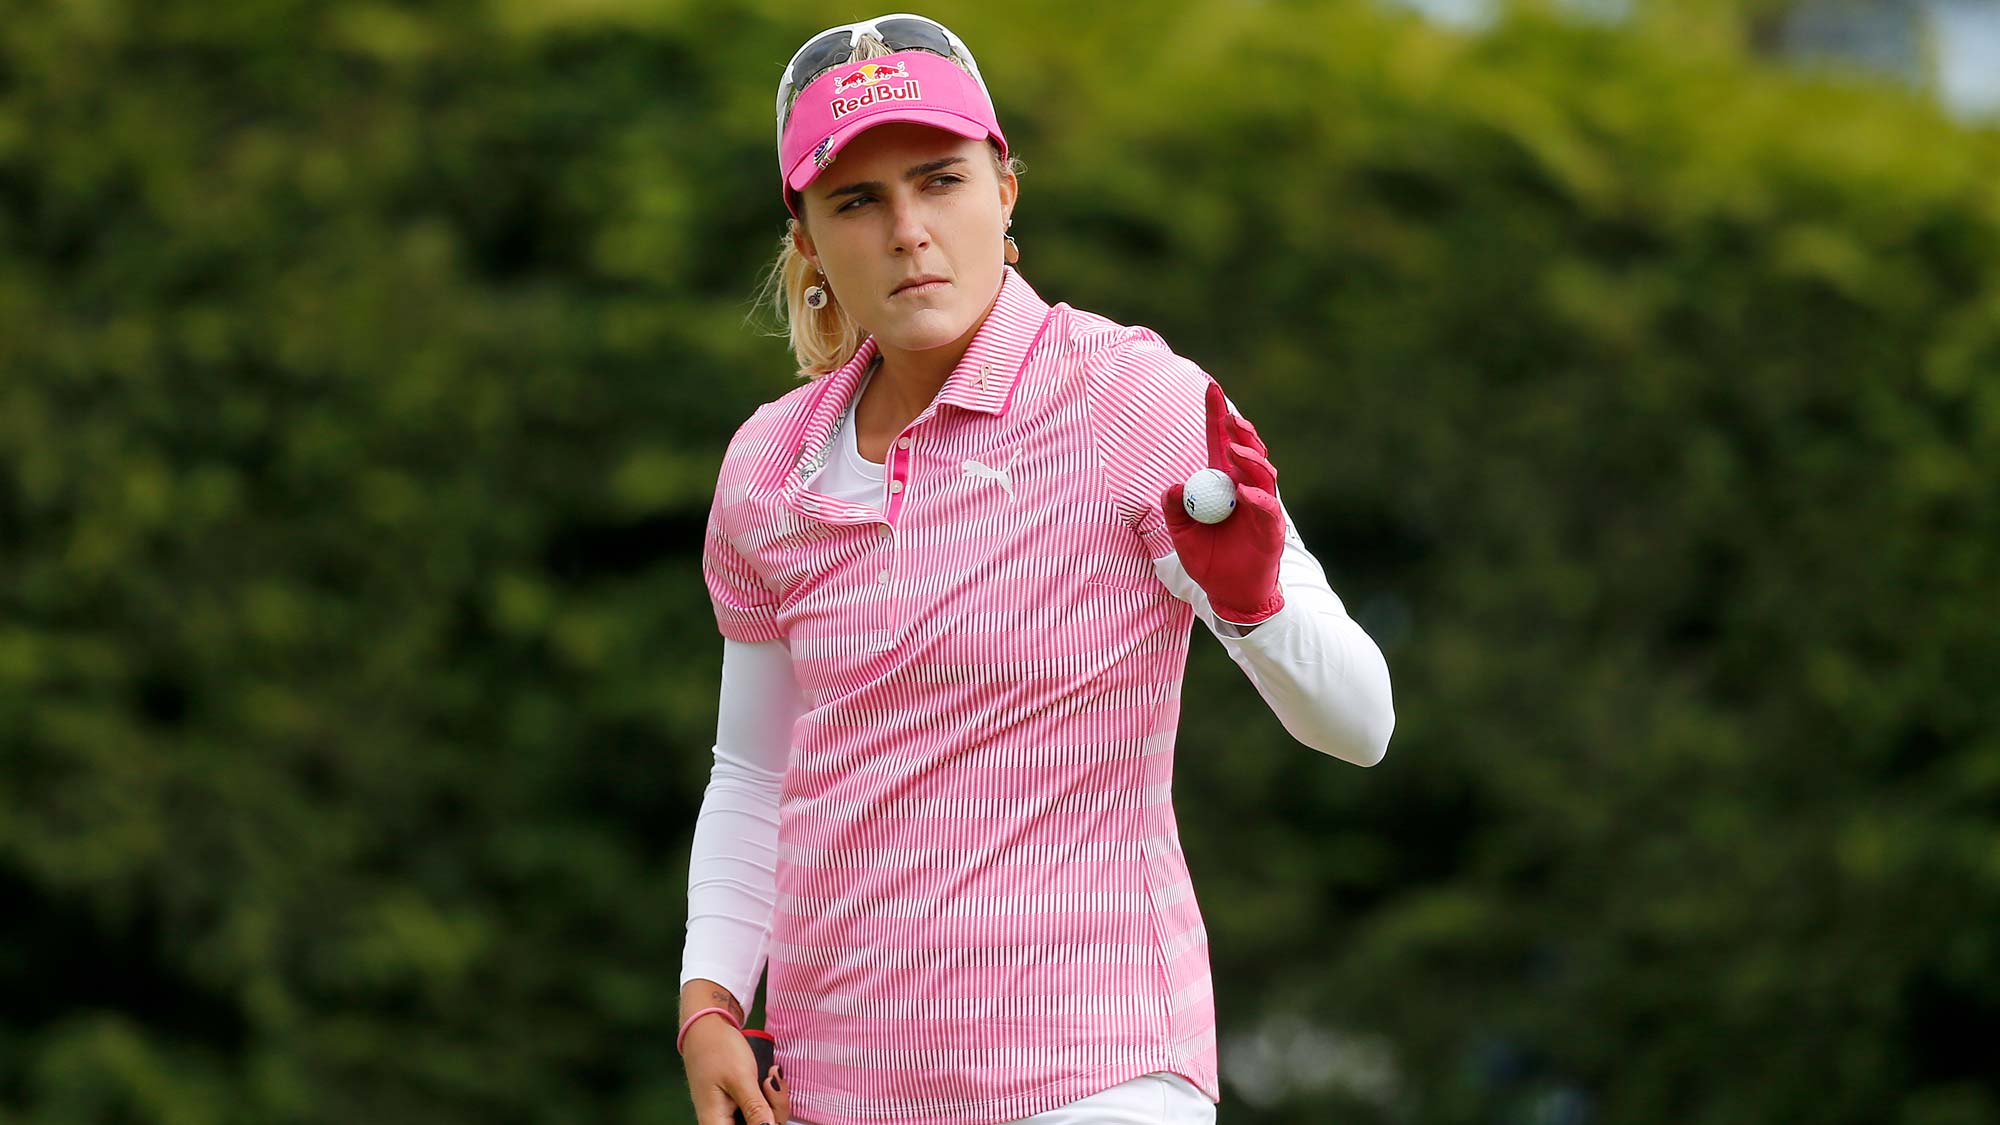 Lexi Thompson waves after making a putt on the 18th hole during the third round of the LPGA Mediheal Championship